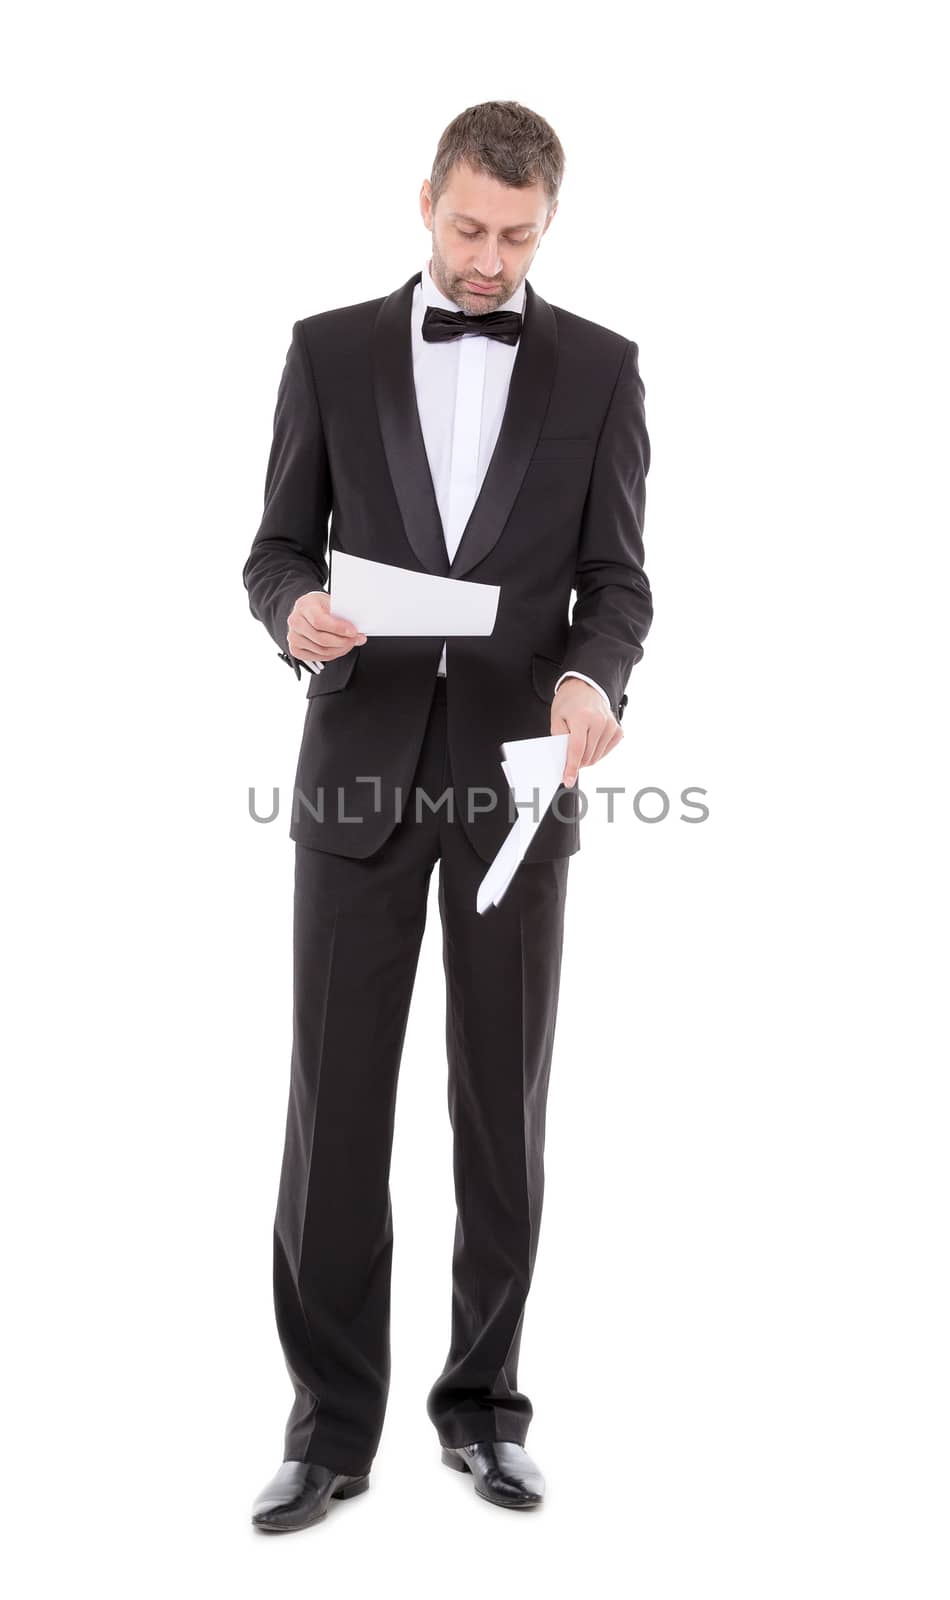 Man in a tuxedo reading the document by Discovod